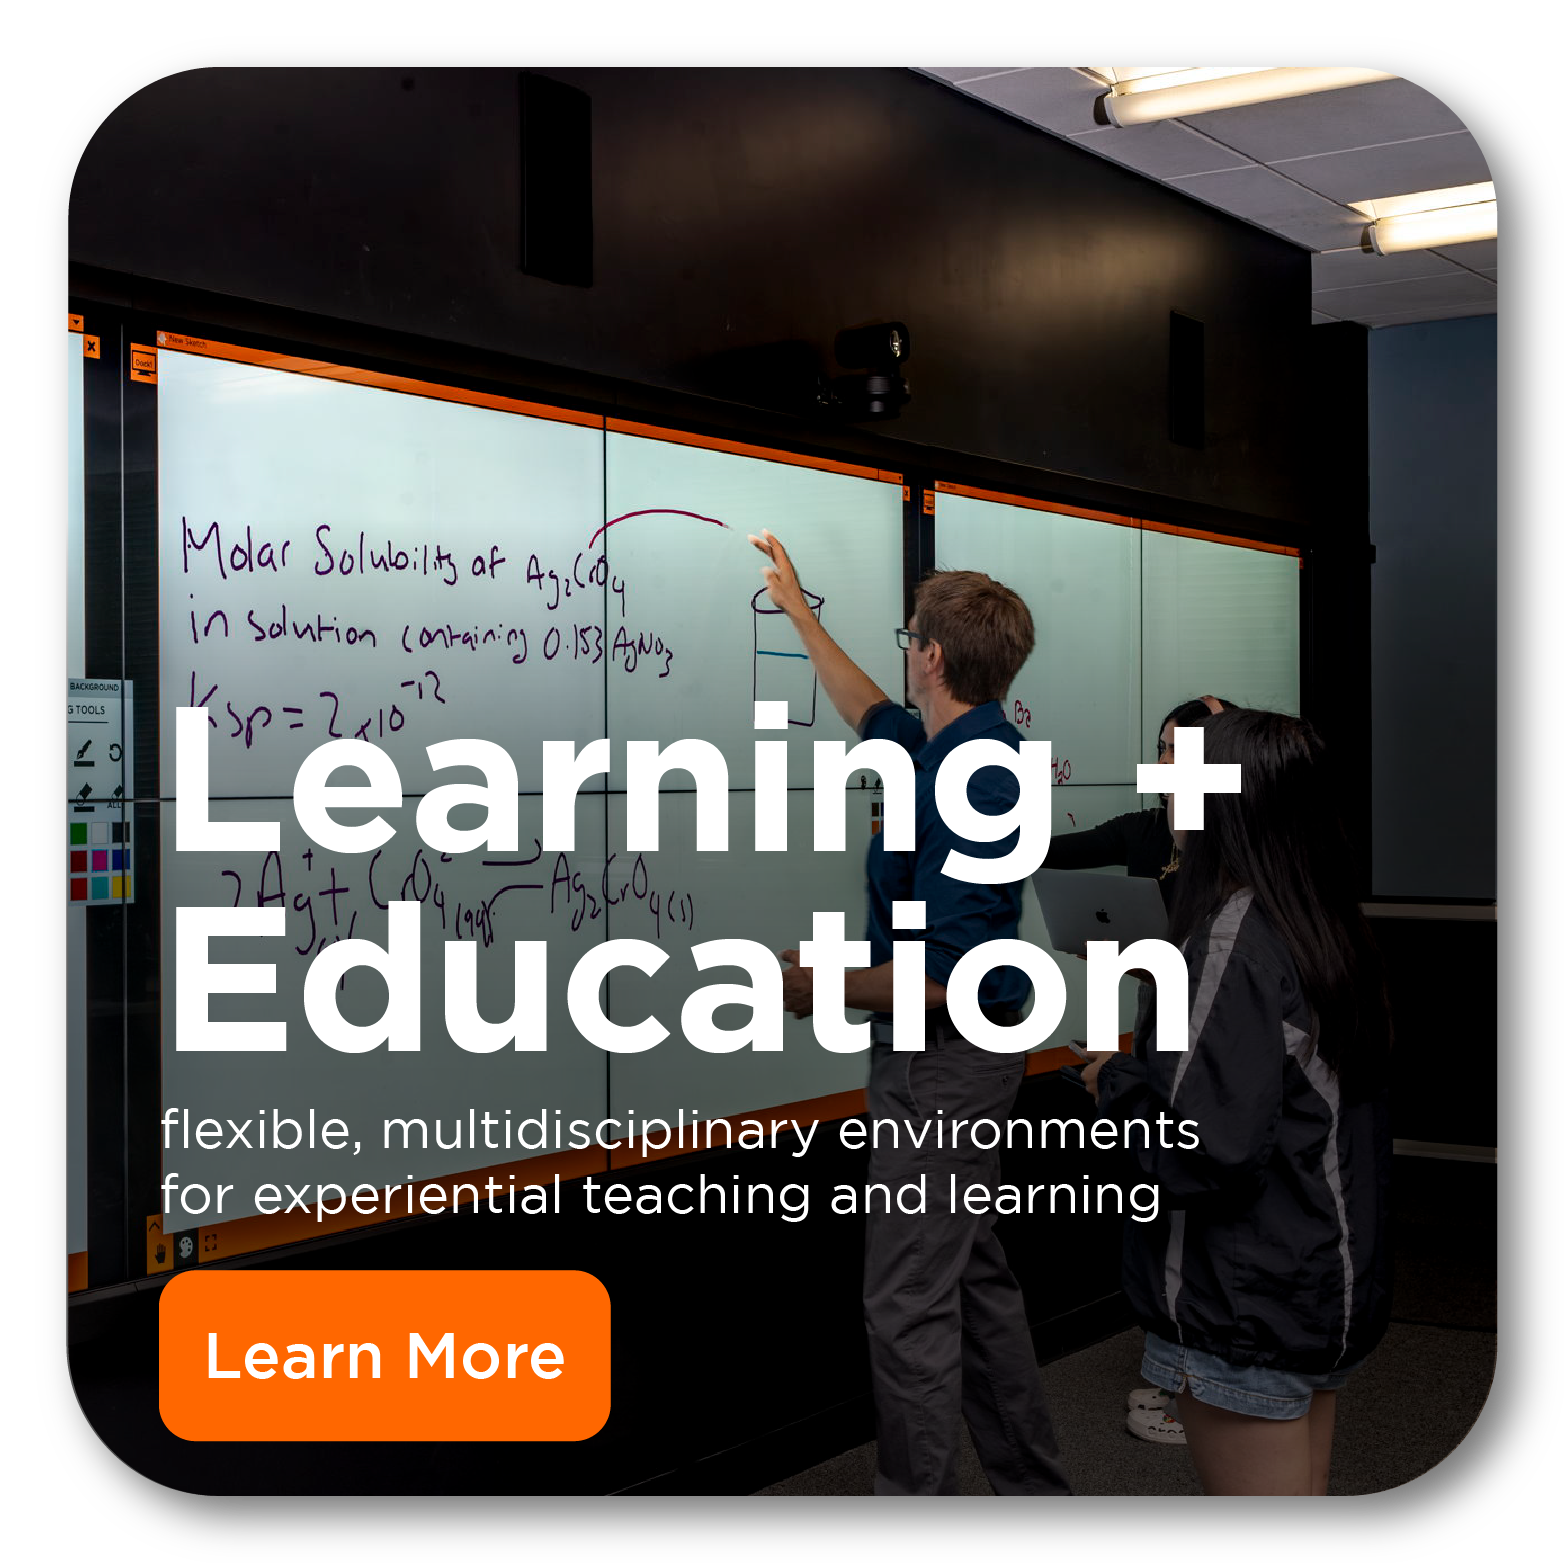 T1V-Learning-and-Education-Spaces-Page-Button-1